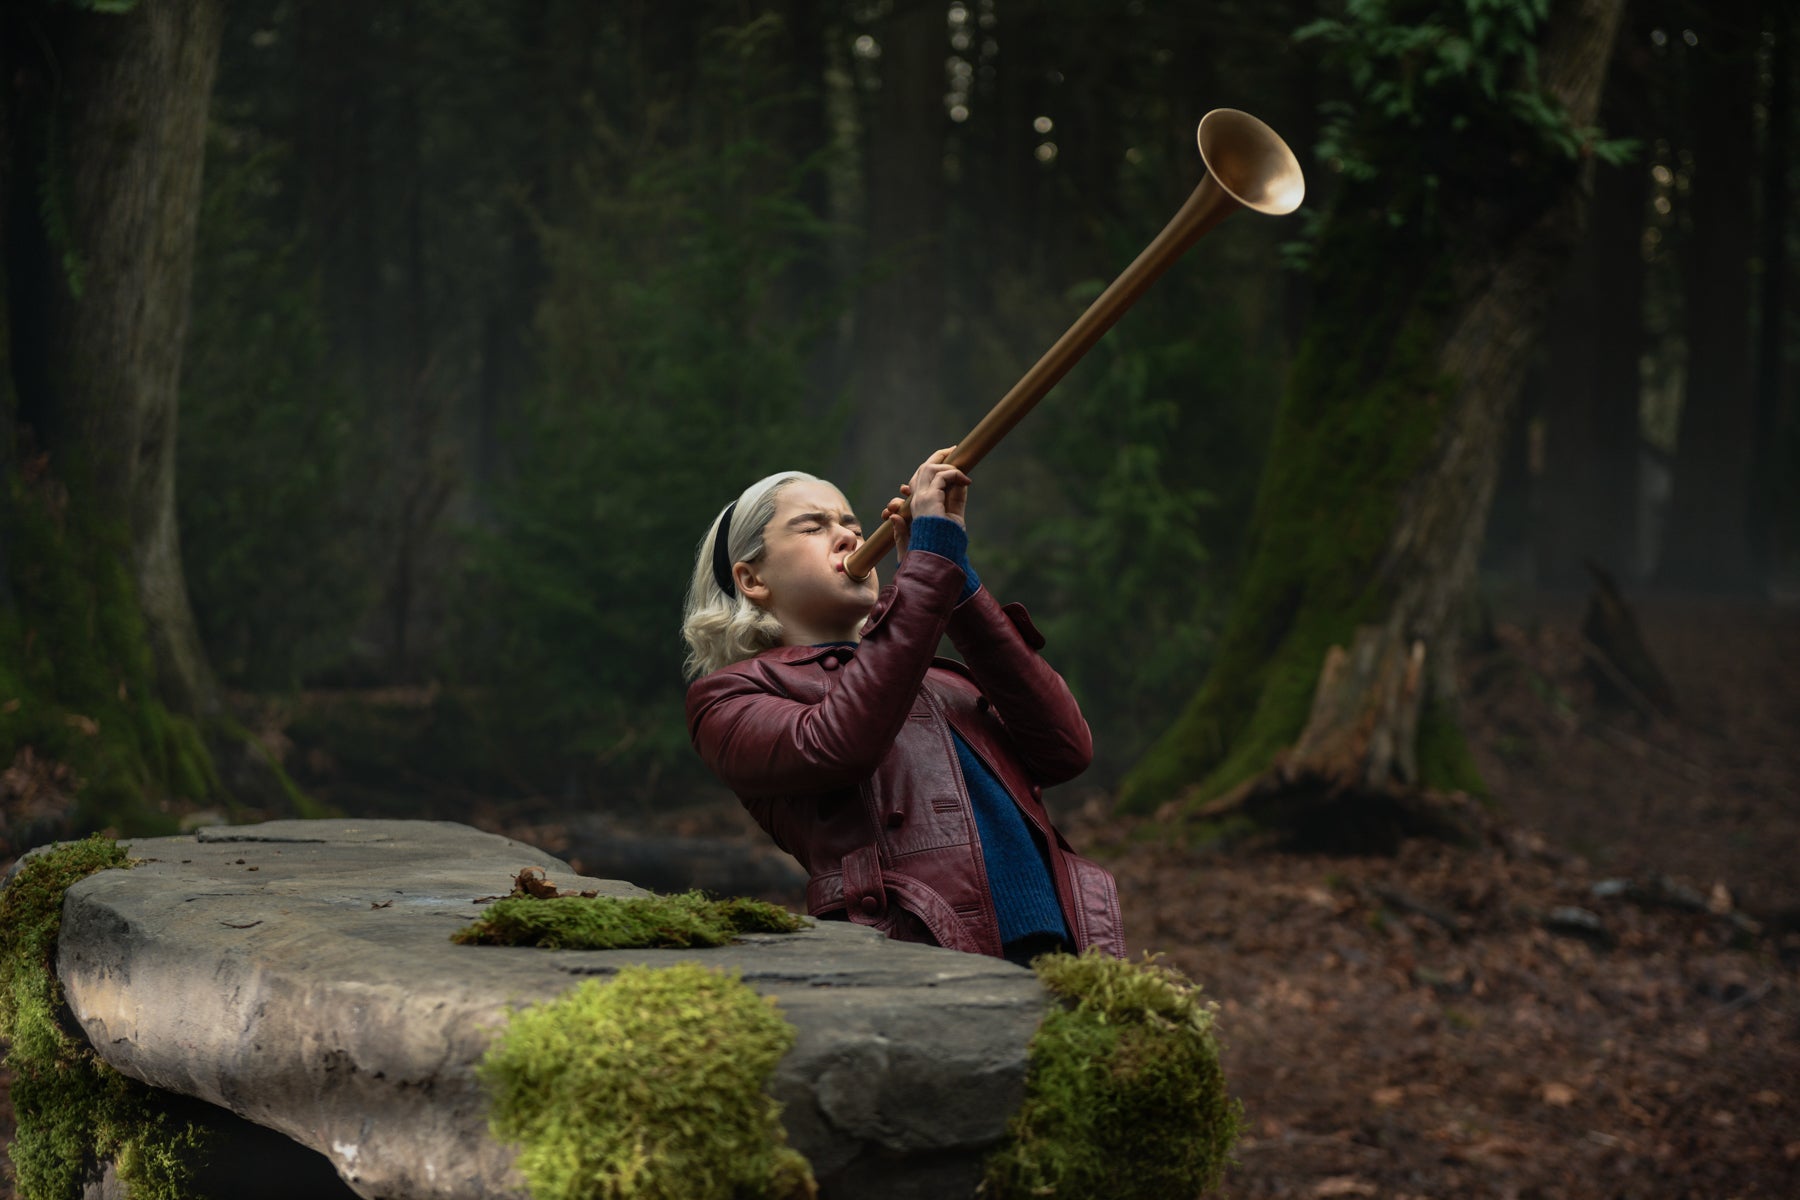 Sabrina Spellman stands in a wooded area by a large rock blowing into a bugle-like instrument in a scene from Chilling Adventures of Sabrina.